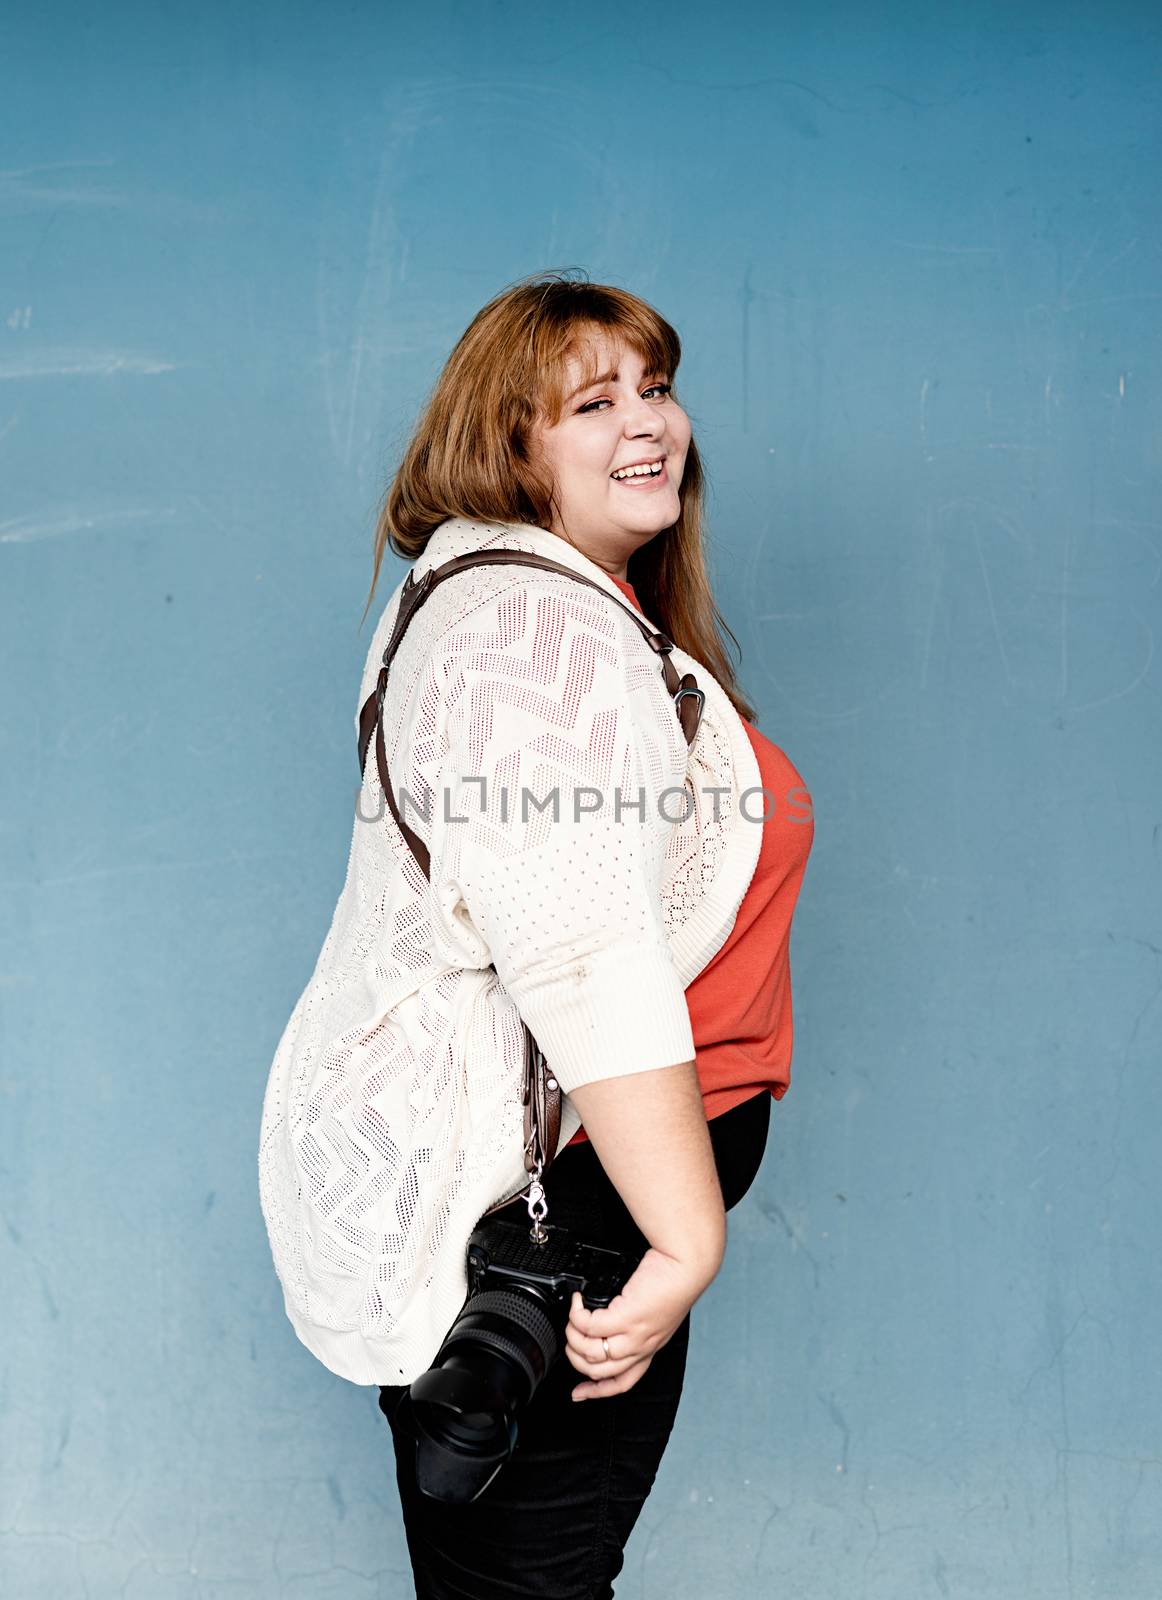 Plus size woman photographer outdoors on blue solid background by Desperada